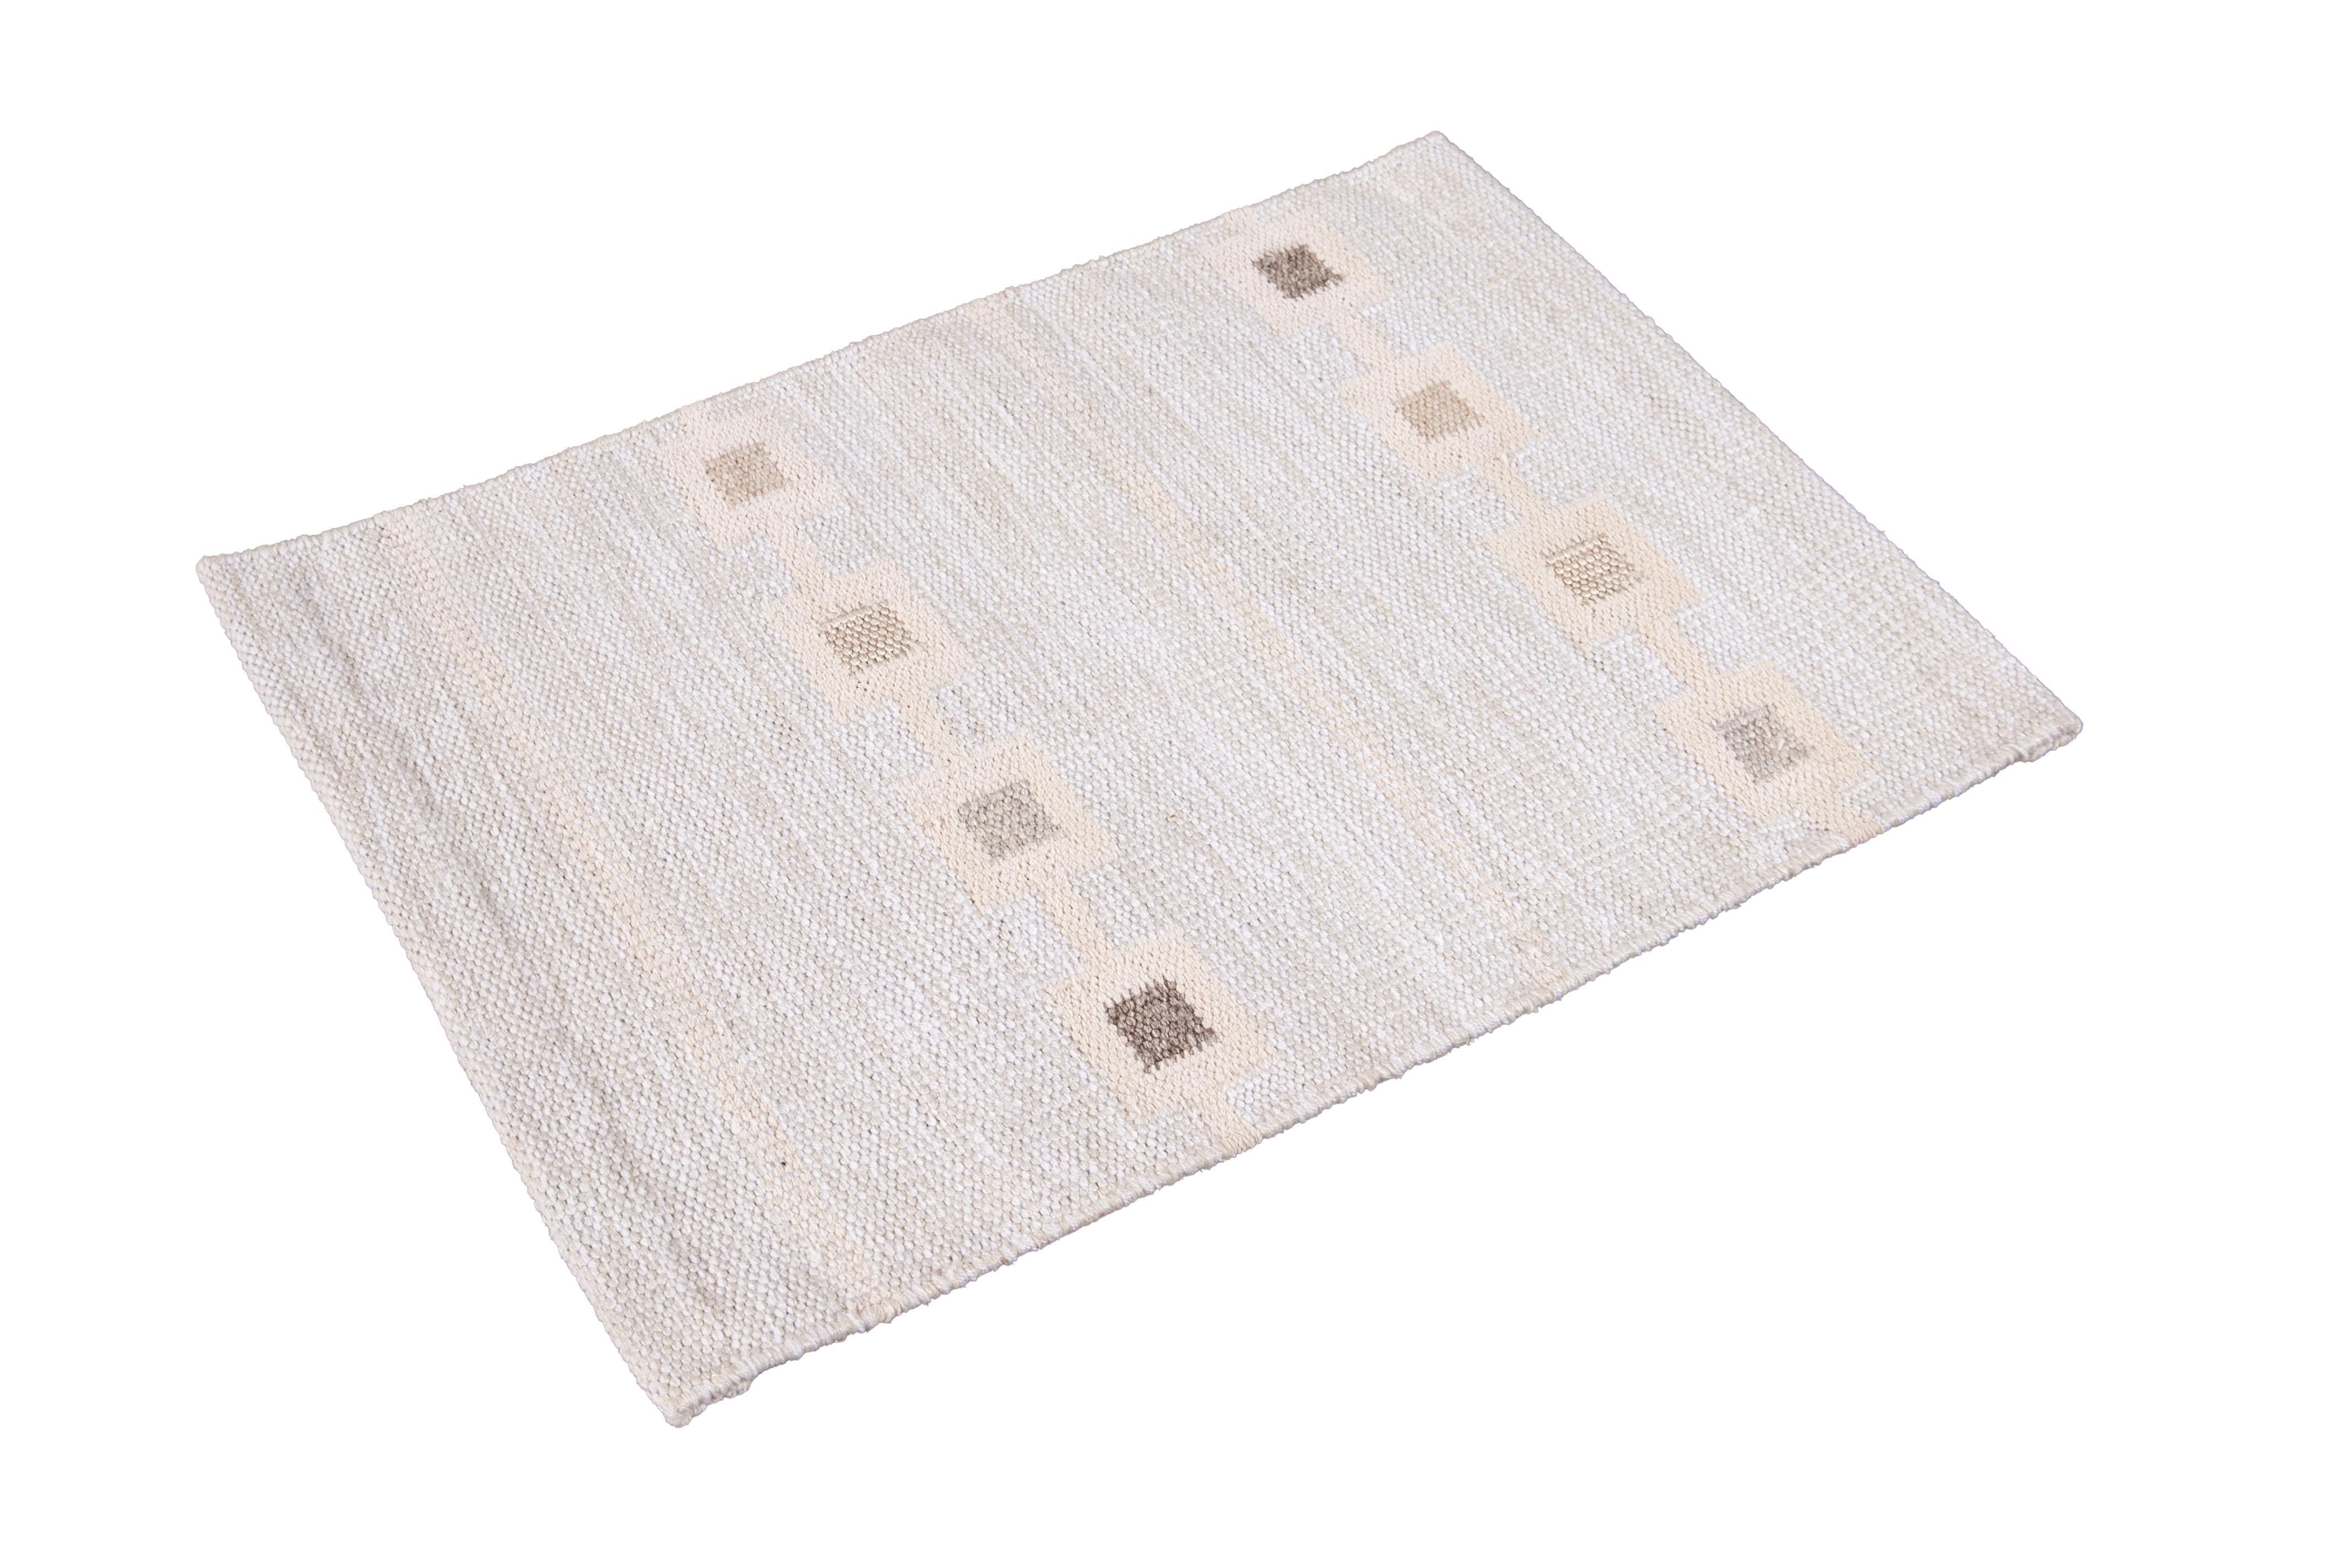 Wool Scandinavian style Kilim custom rug. Custom sizes and colors made-to-order.

Material: Wool 
Lead time: Approx. 15-20 weeks available
Colors: Custom colors and styles available made in India.
The price listed is for an 8' x 10' rug.